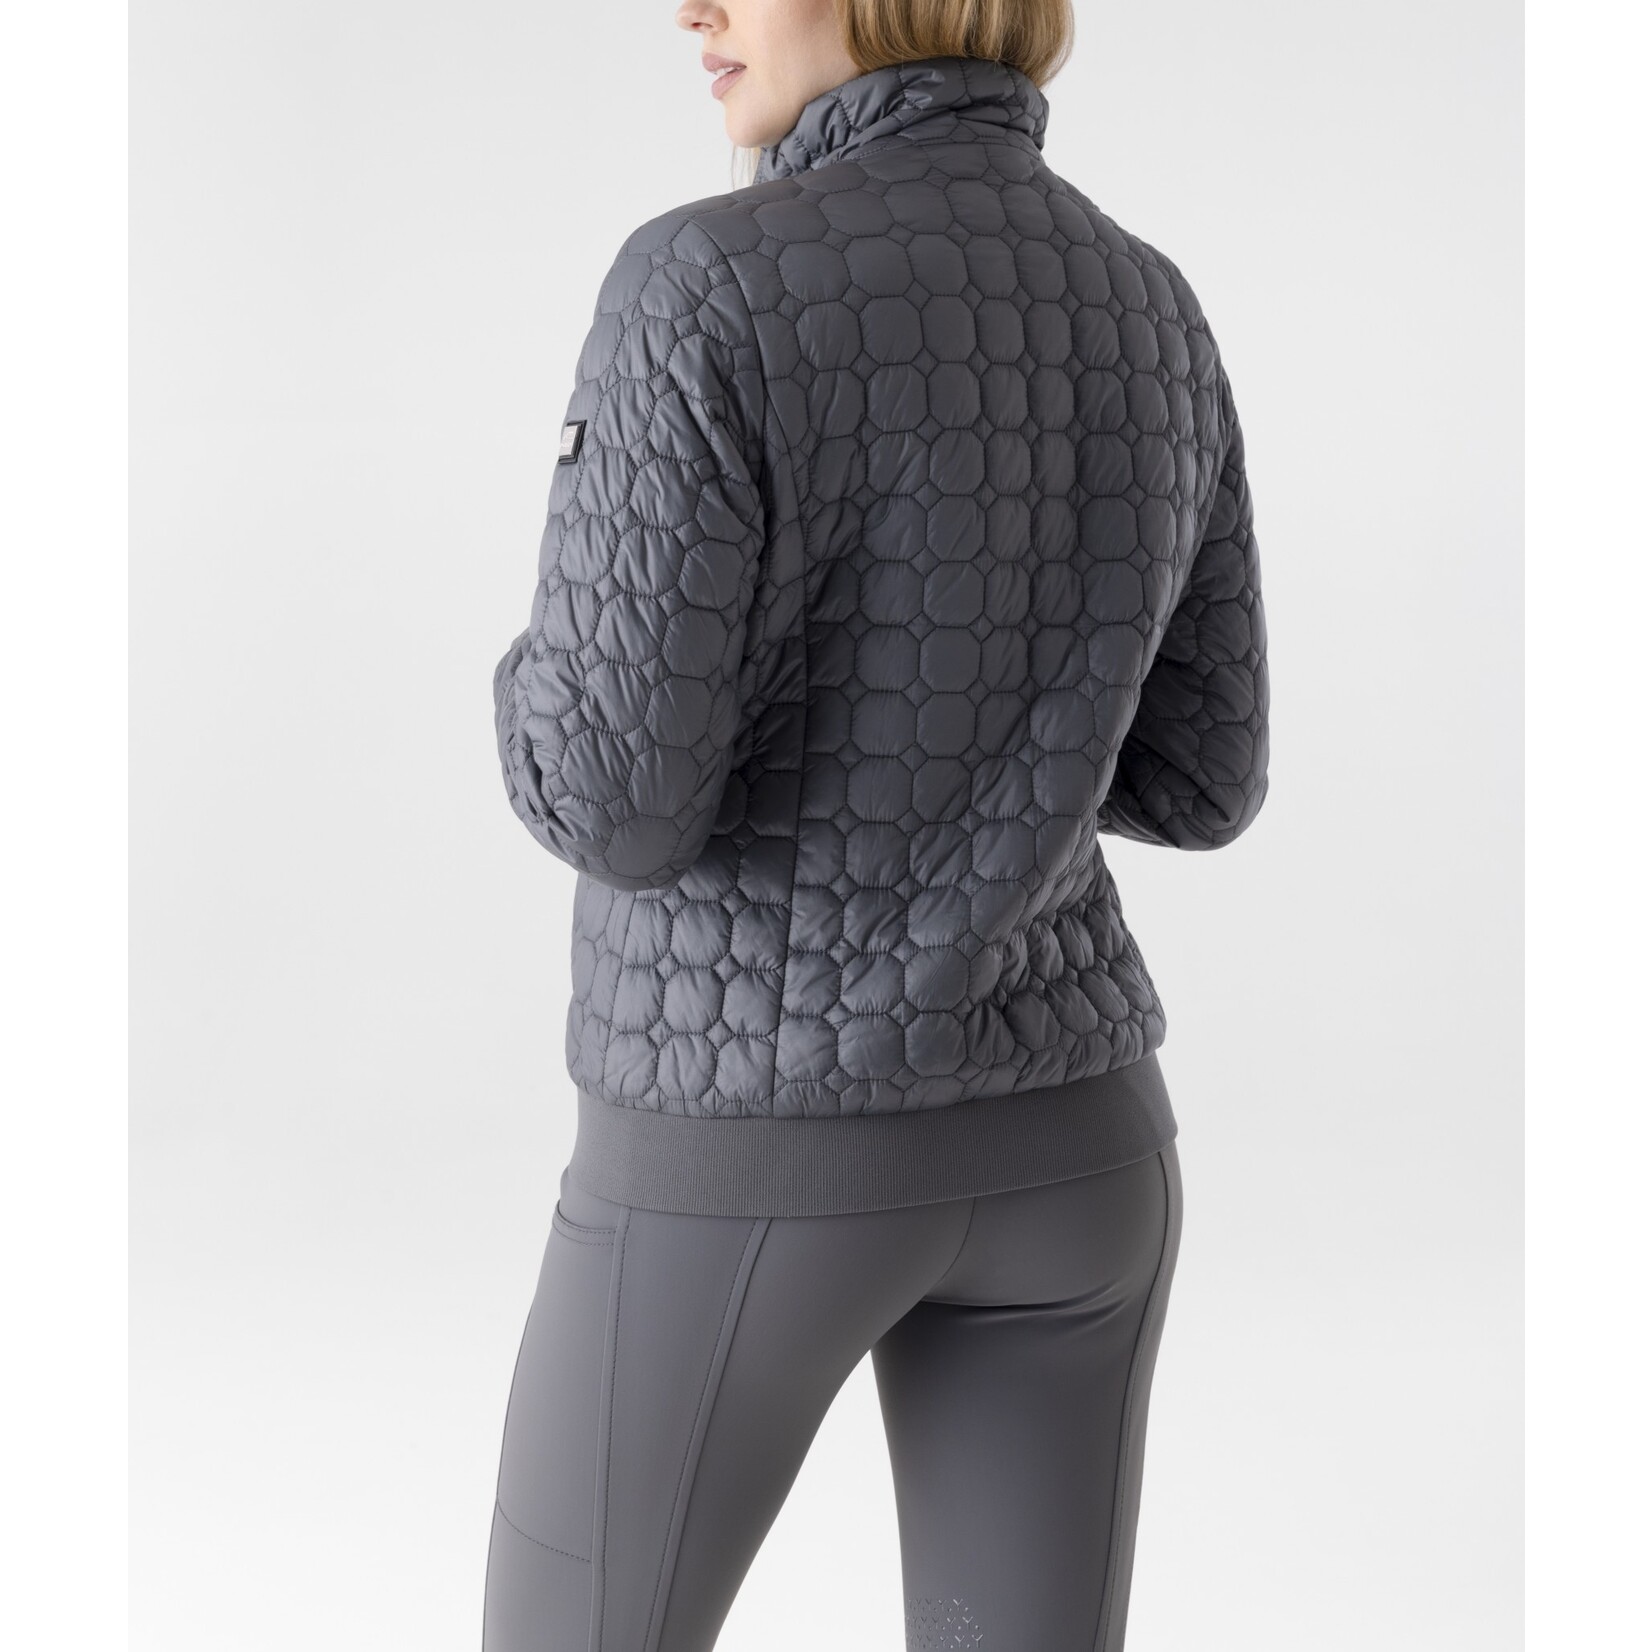 Equiline Q10740 Equiline Edae Women's Octagon Quilted Bomber Jacket